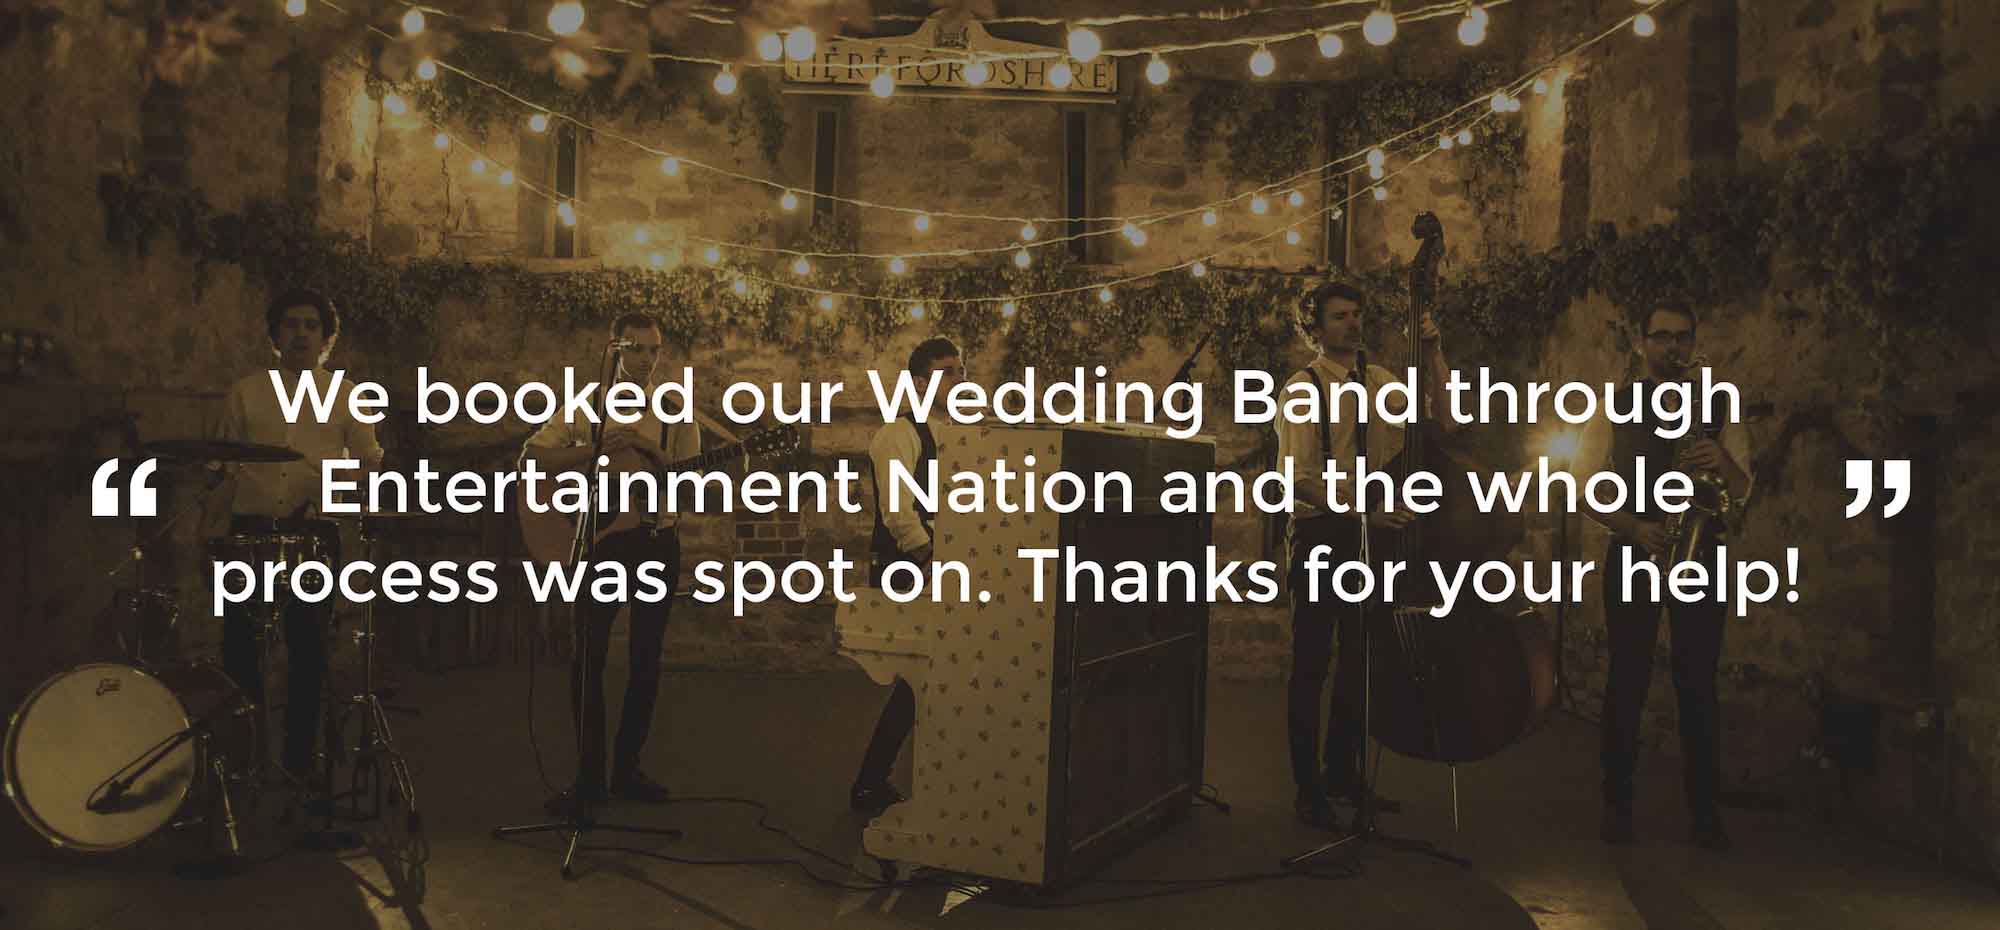 Client Review of a Wedding Band South Yorkshire